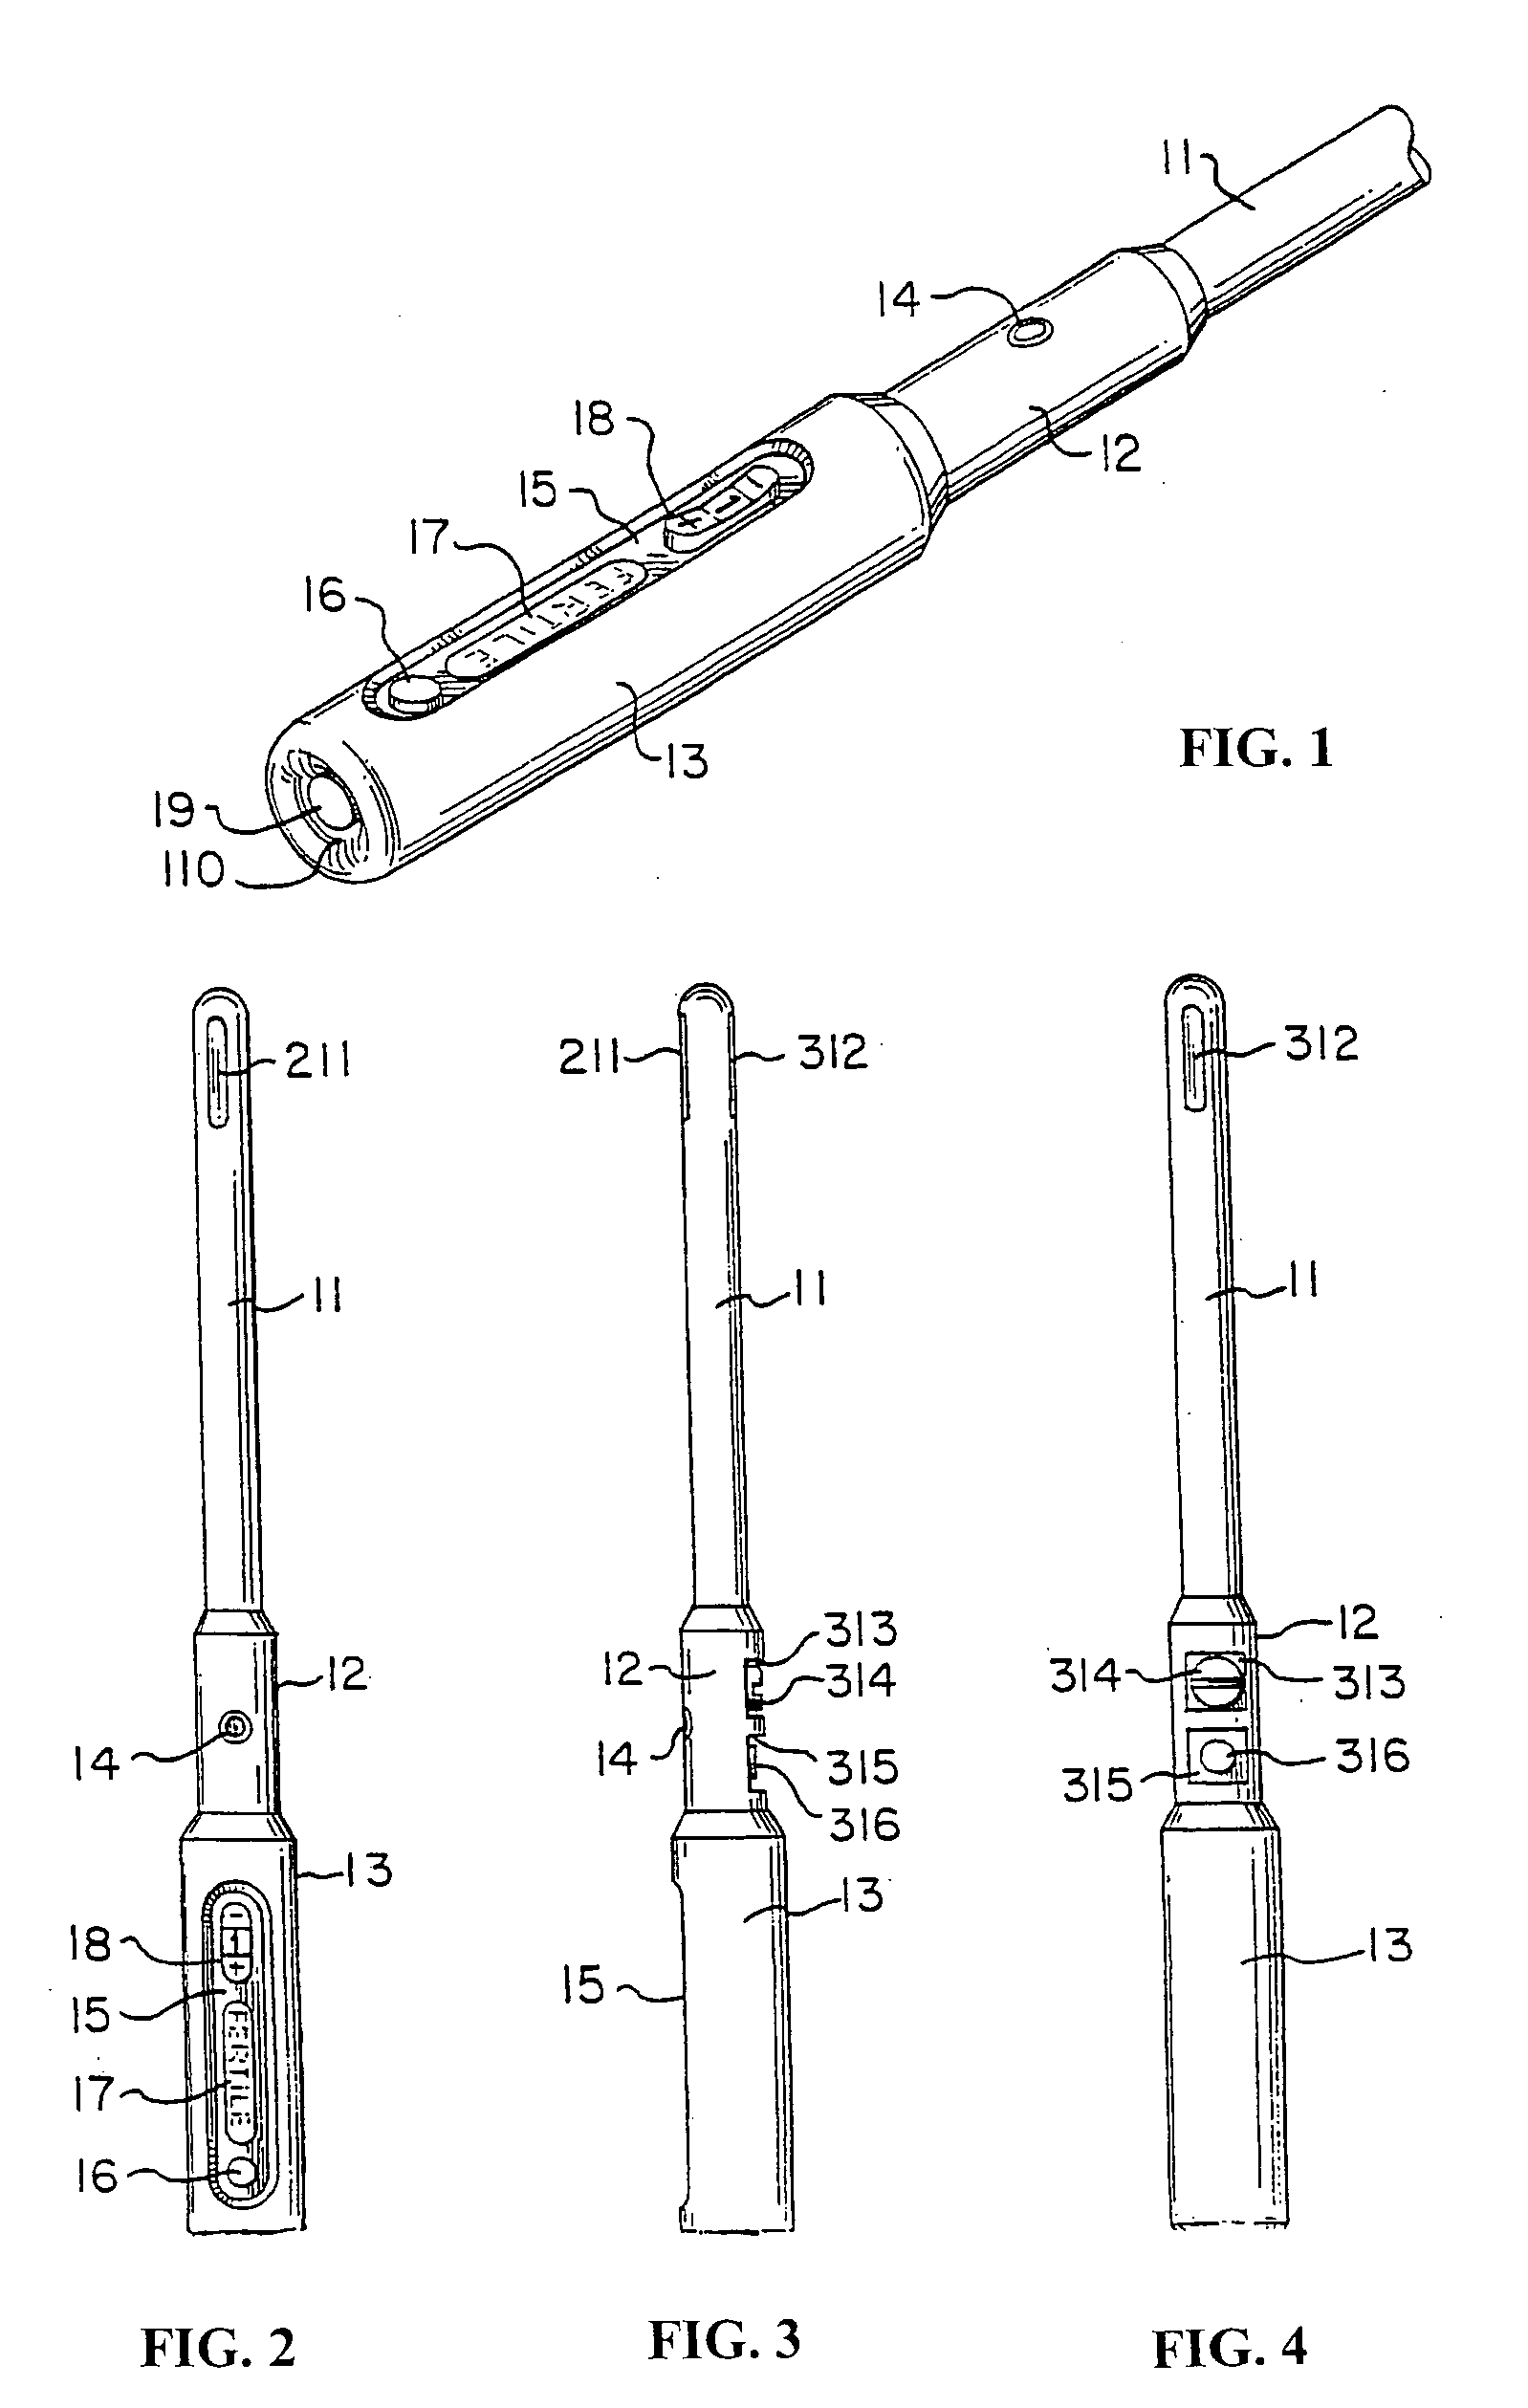 Methods and apparatus for diagnosis of fertility status in the mammalian vagina